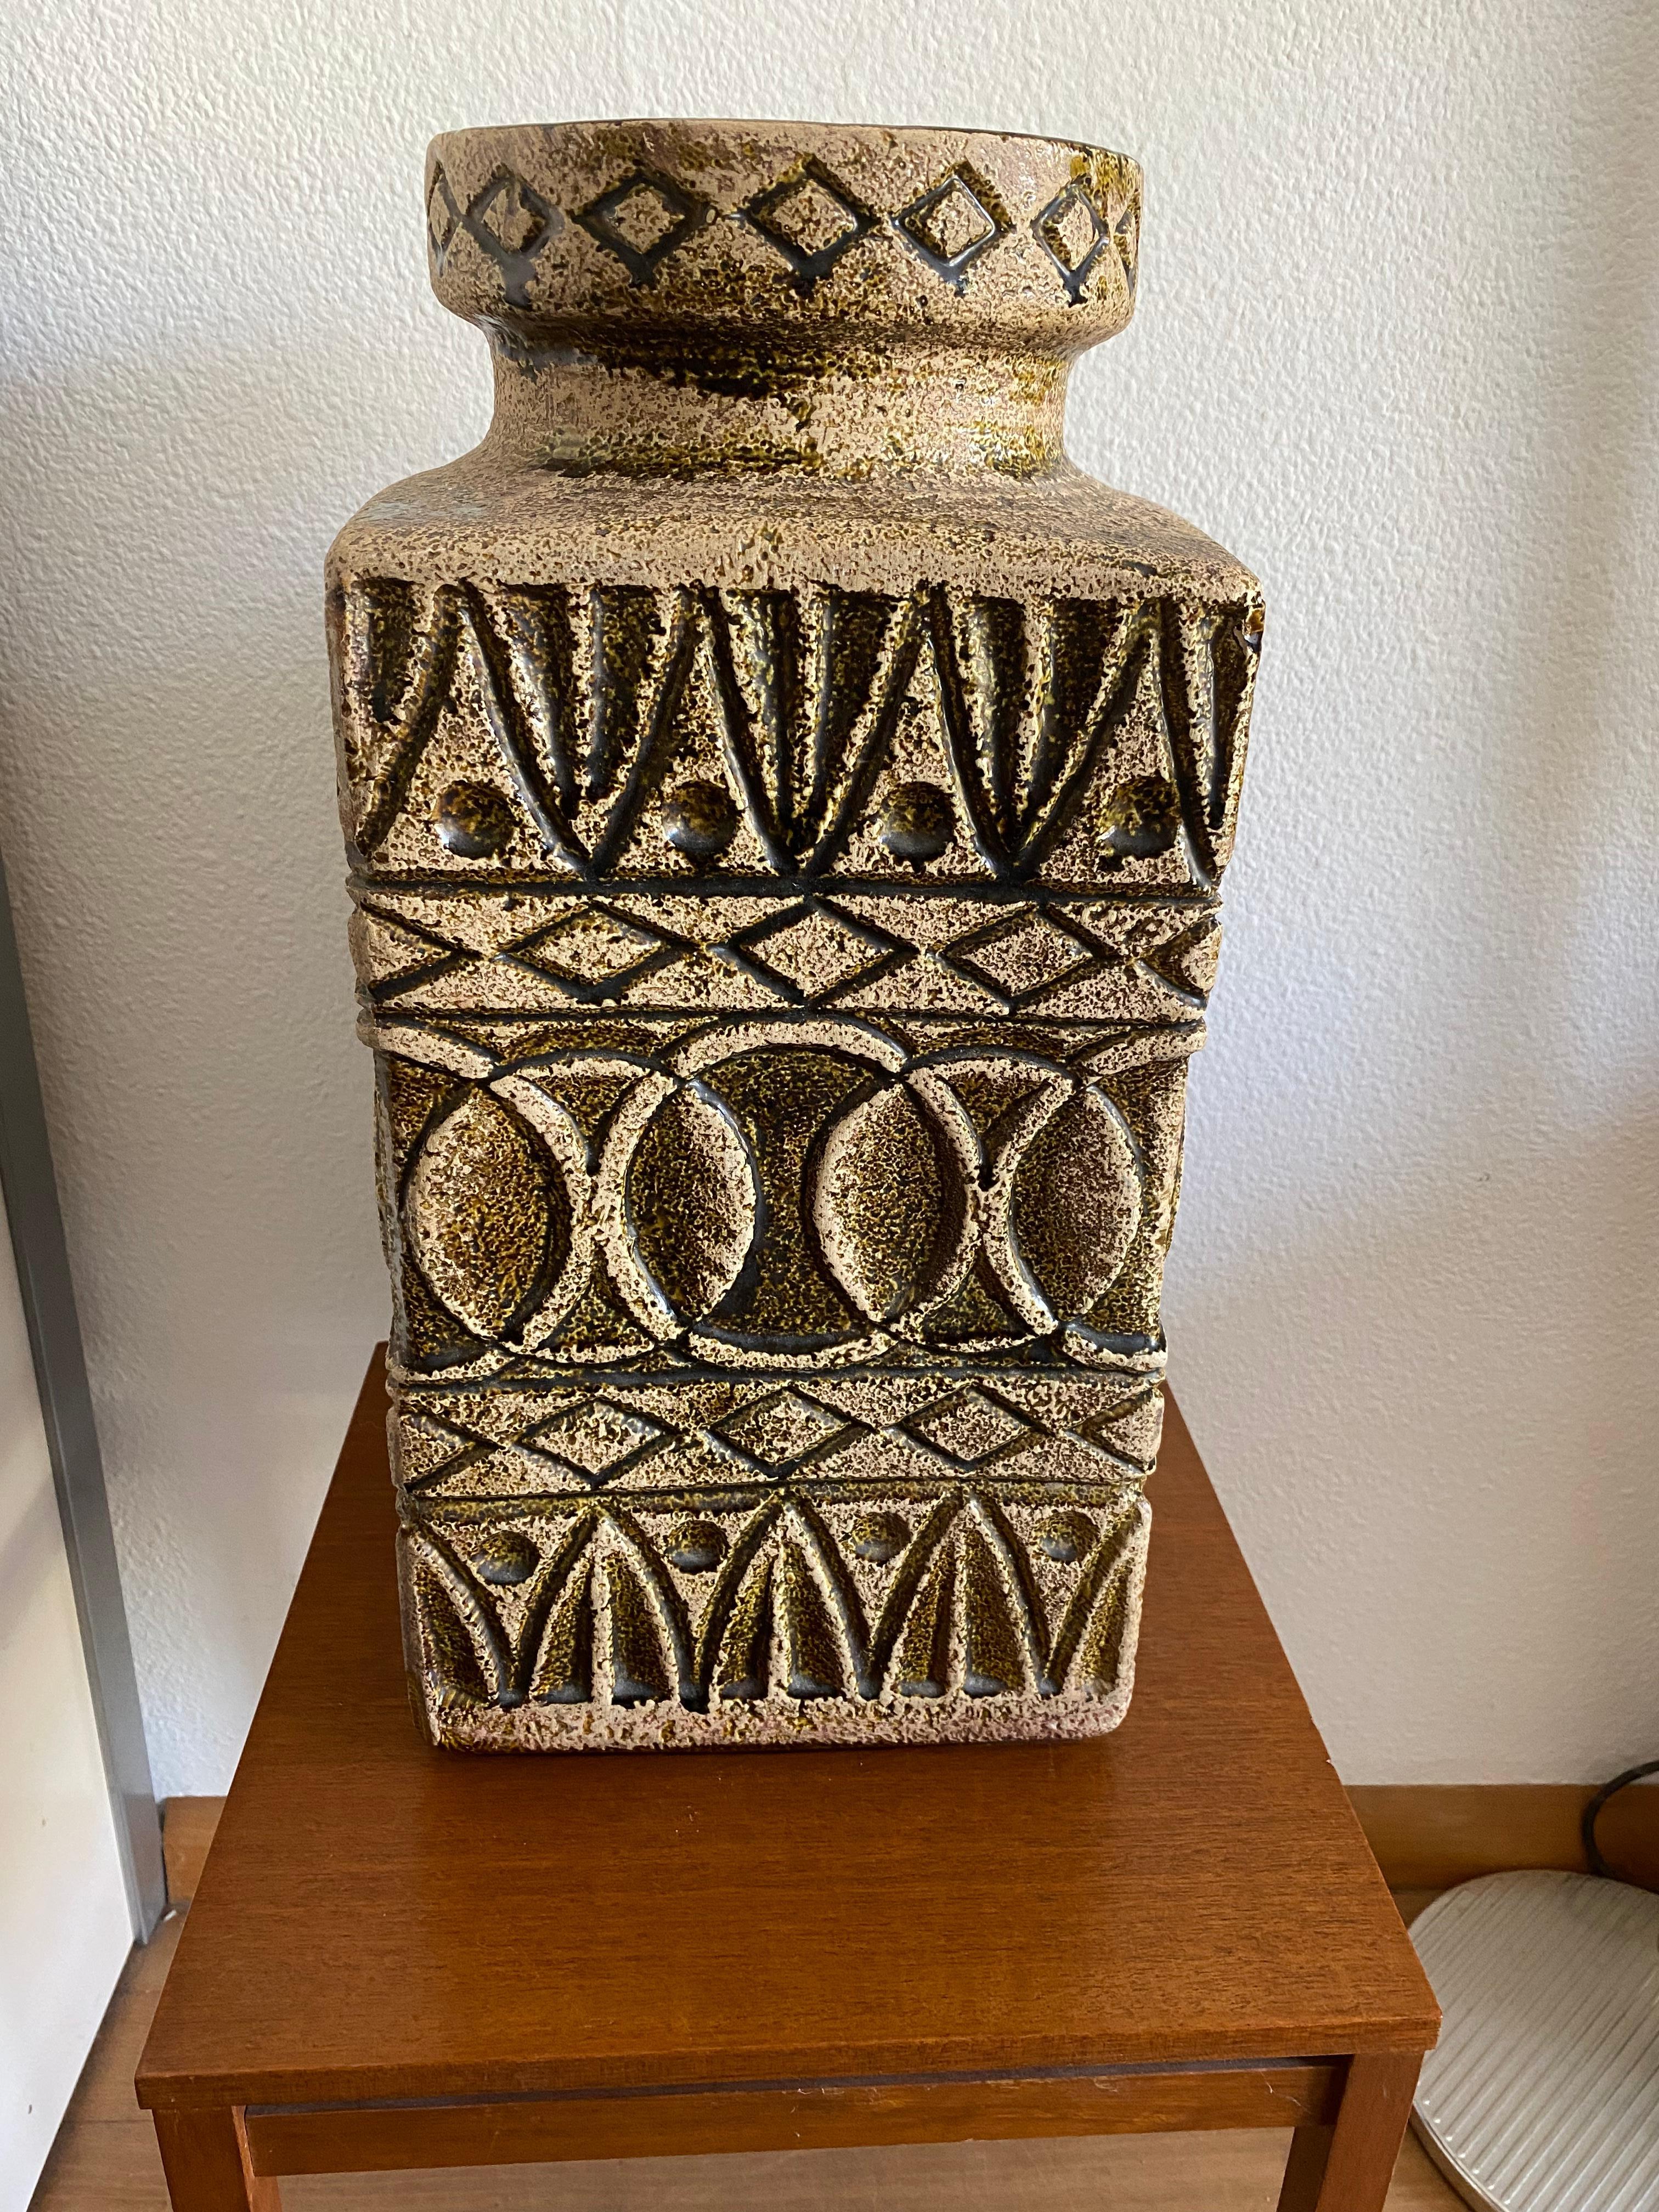 Beautiful tall Bay vase, quite rare decor.
Designer: Bodo Mans was employed by the Bay Keramik company from 1959. Mans officially retired from BAY in 1975. Since then he worked as a freelance industrial designer, painter, graphic artist, and